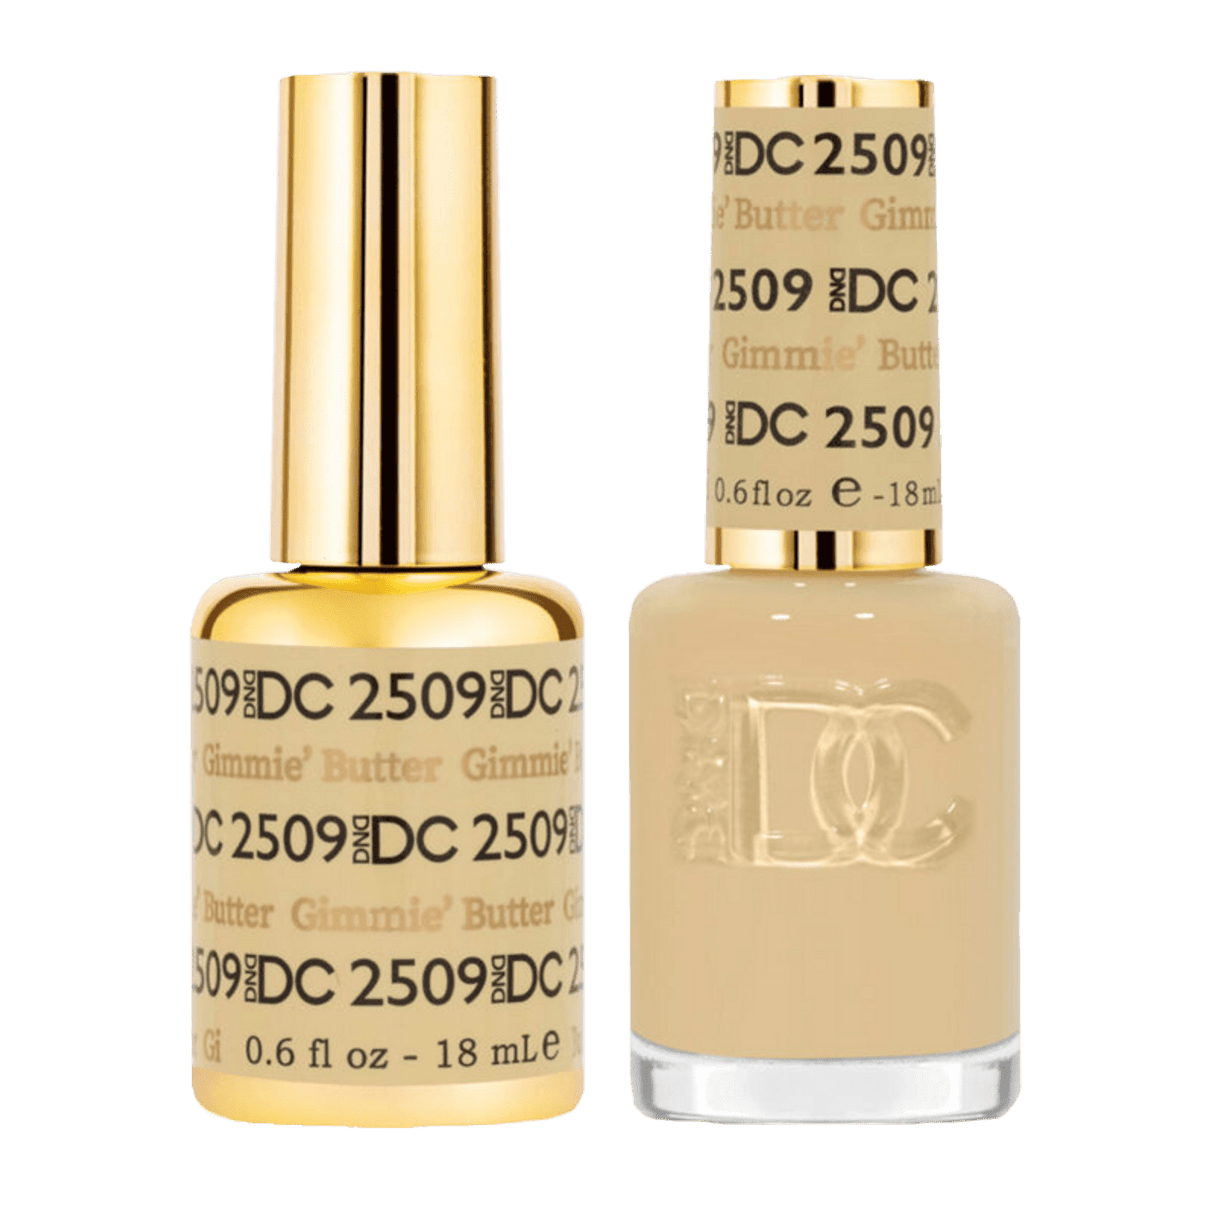 DND DC Duo Gel Matching Color 2509 Gimmie' Butter